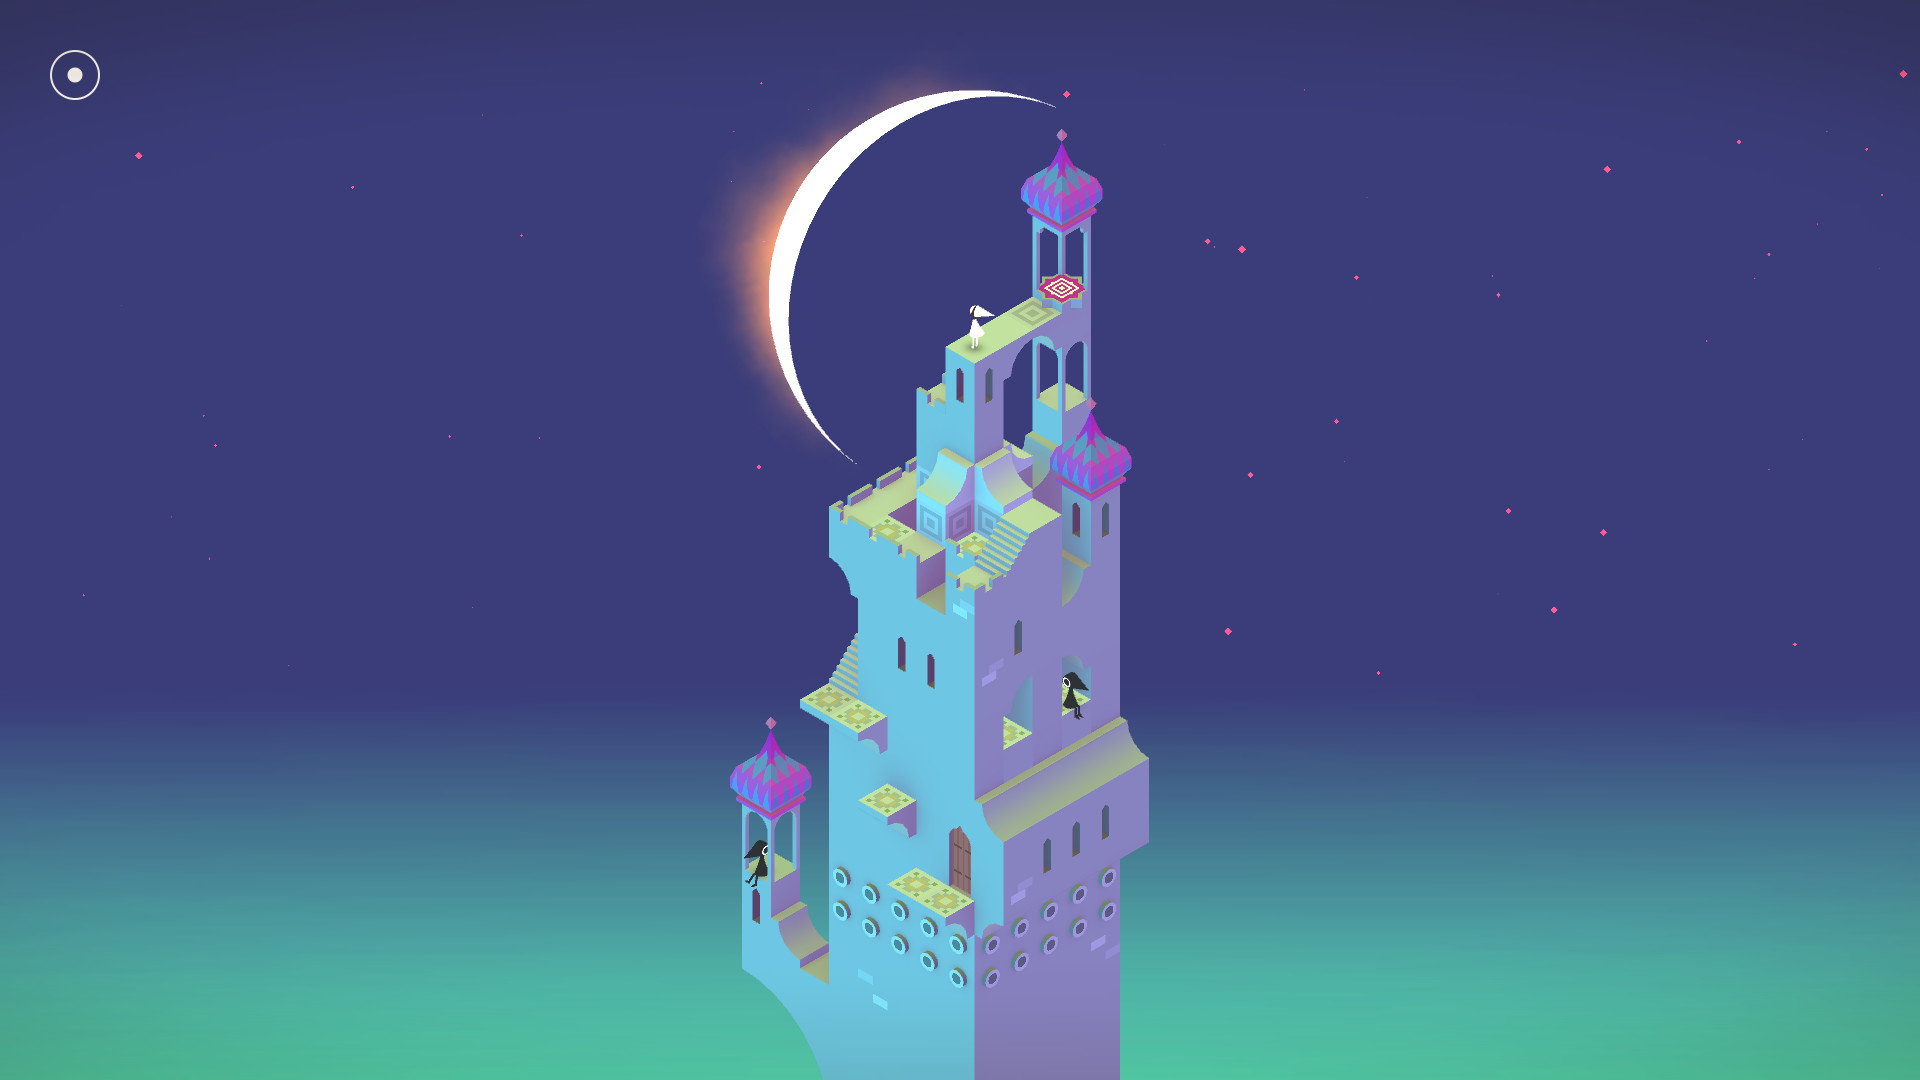 Monument Valley: Panoramic Edition Steam CD Key